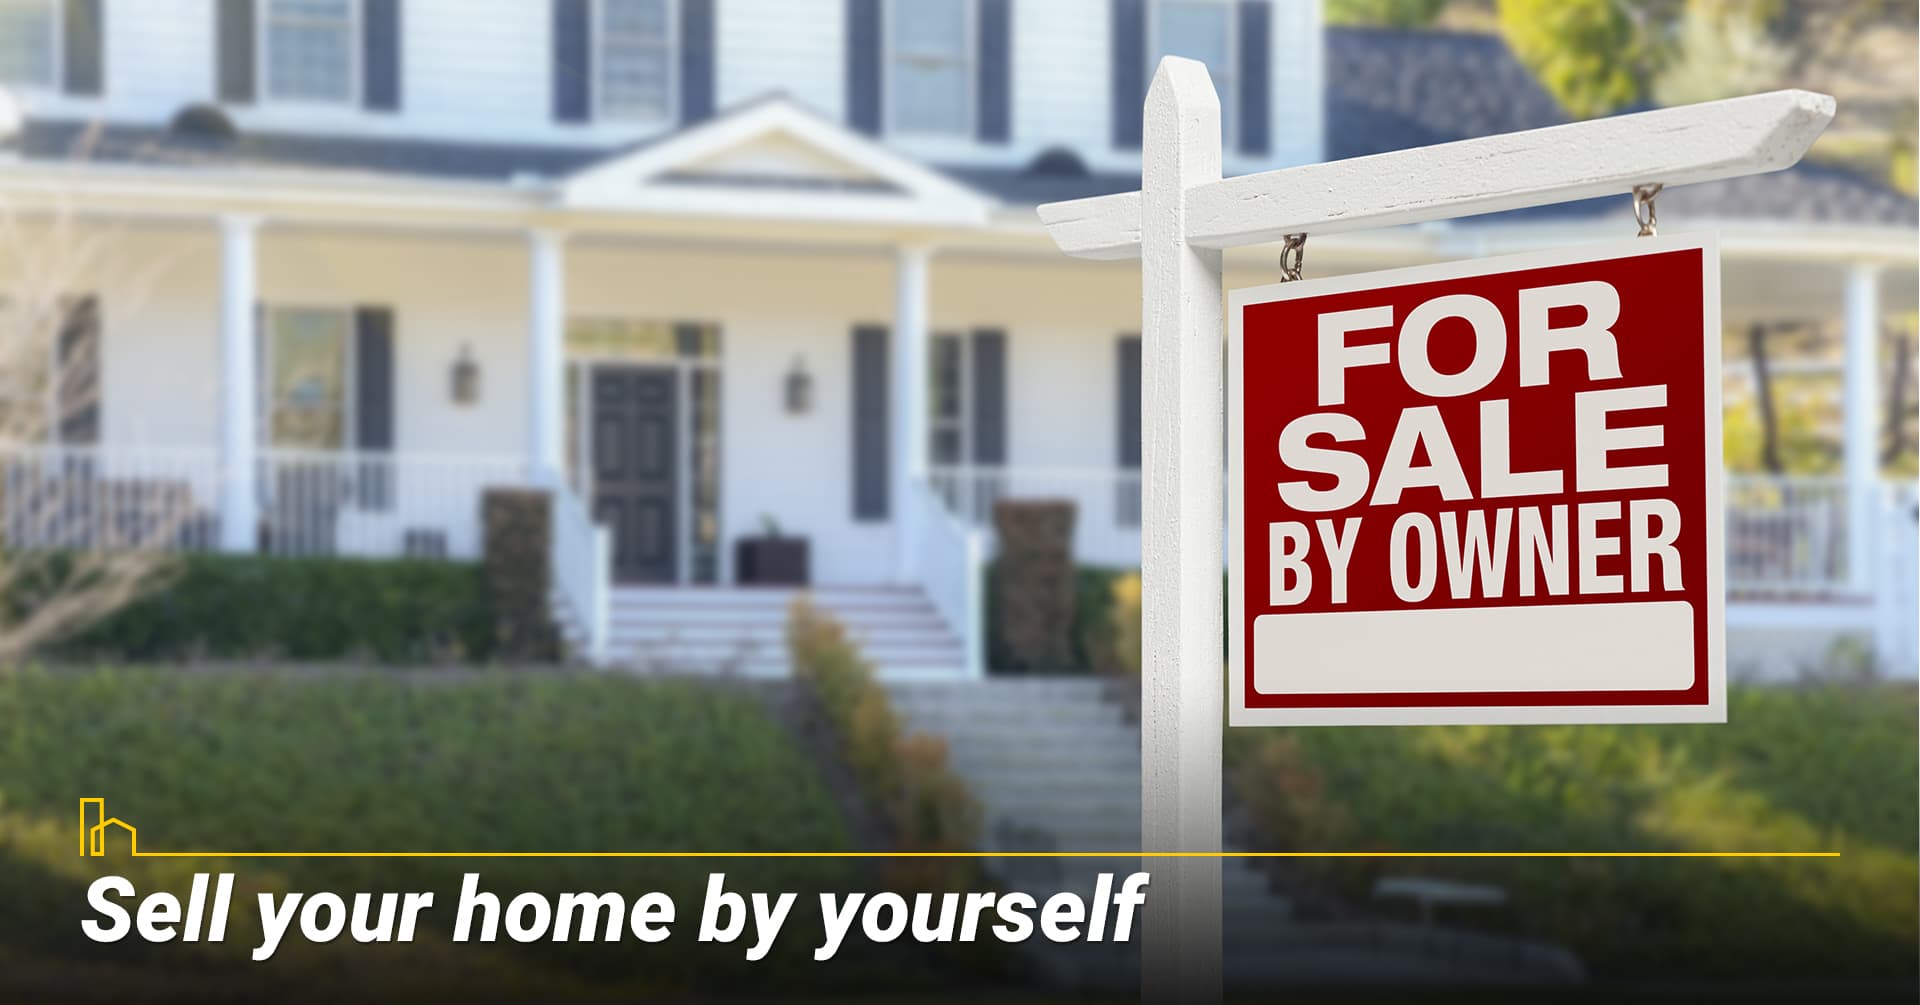 Sell your home by yourself.